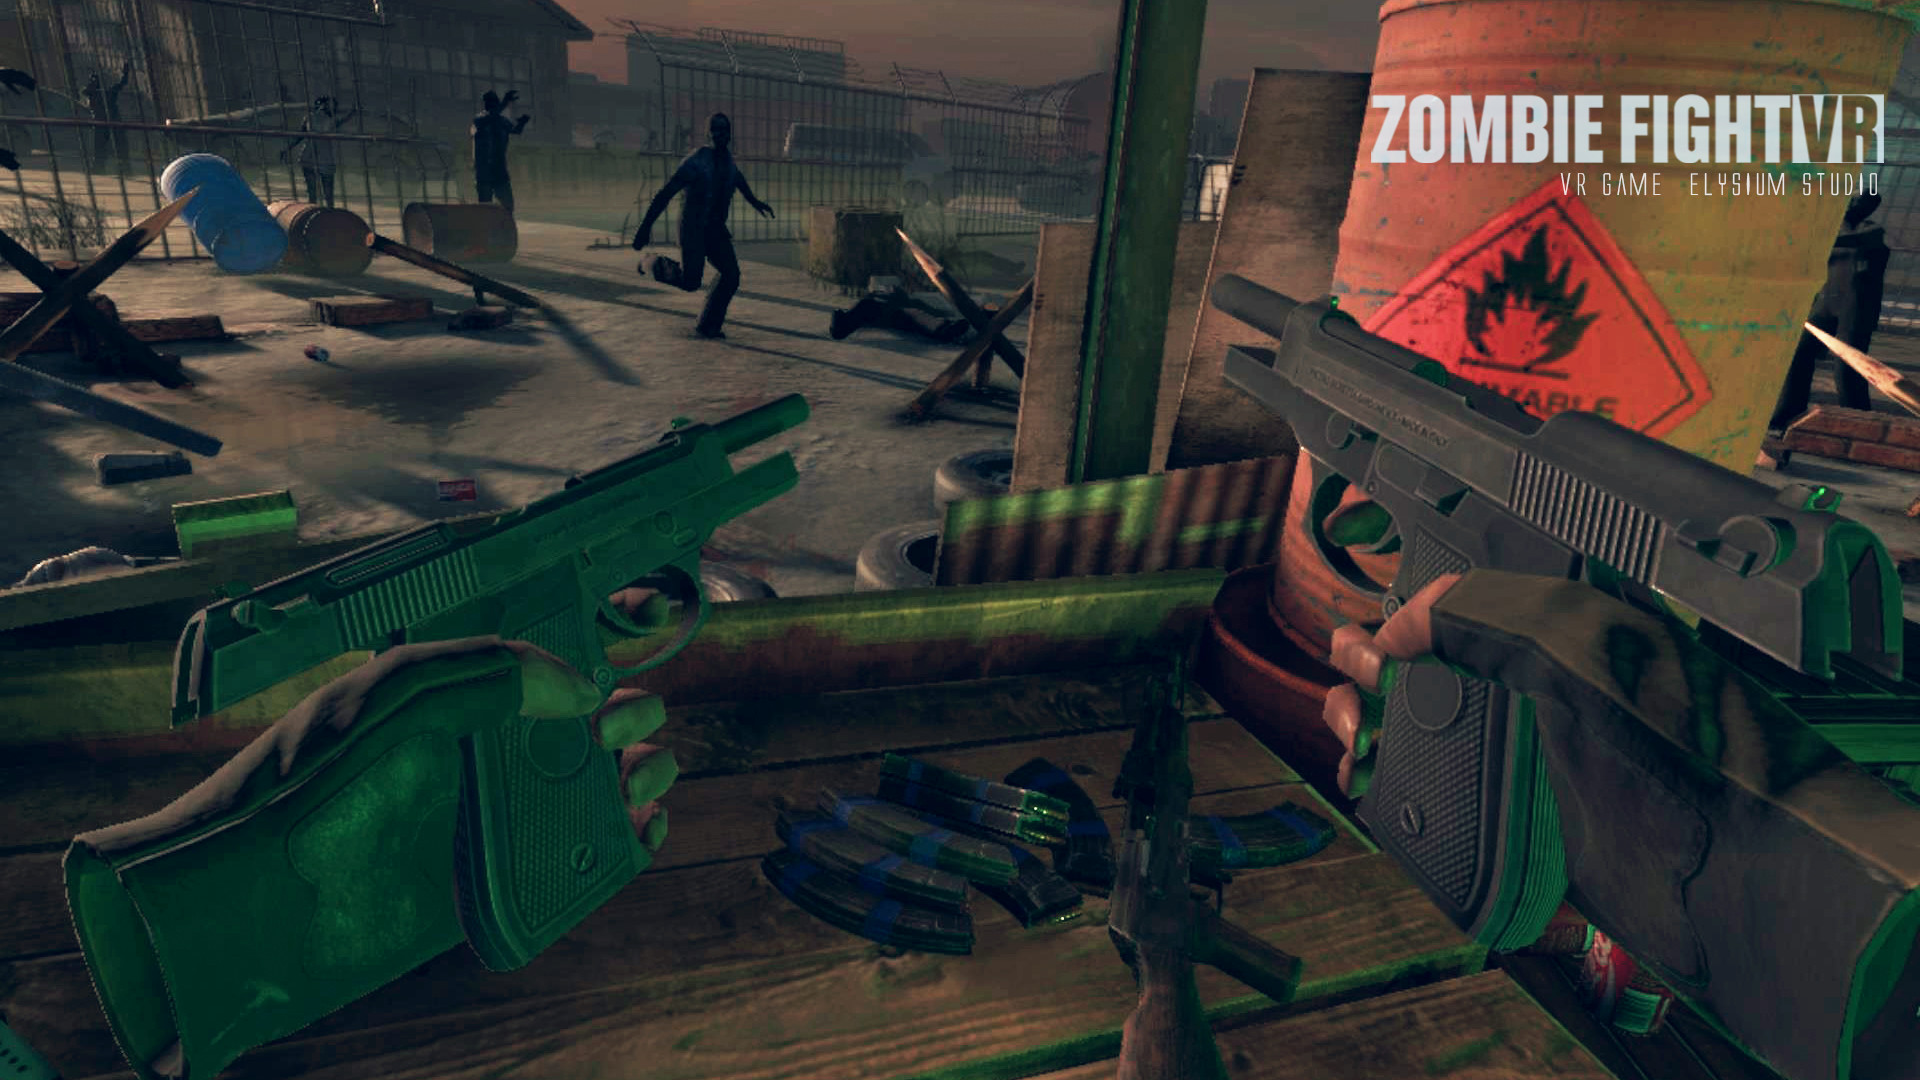 ZombieFight VR Demo Featured Screenshot #1